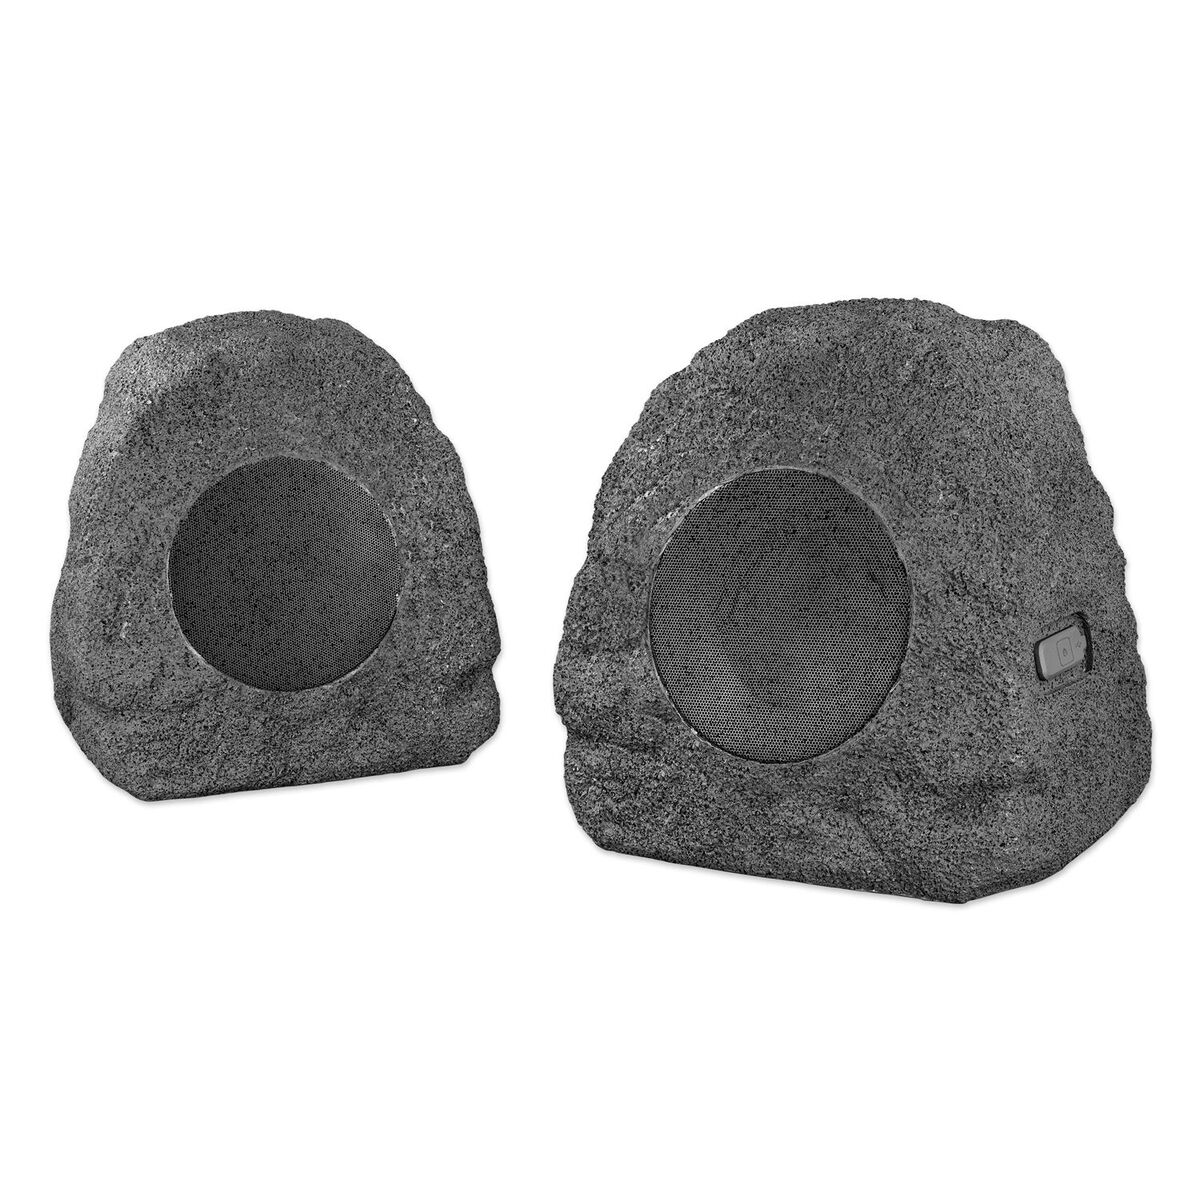 Innovative Technology Rechargeable Bluetooth Outdoor Wireless Rock Speakers, Pair - image 1 of 11